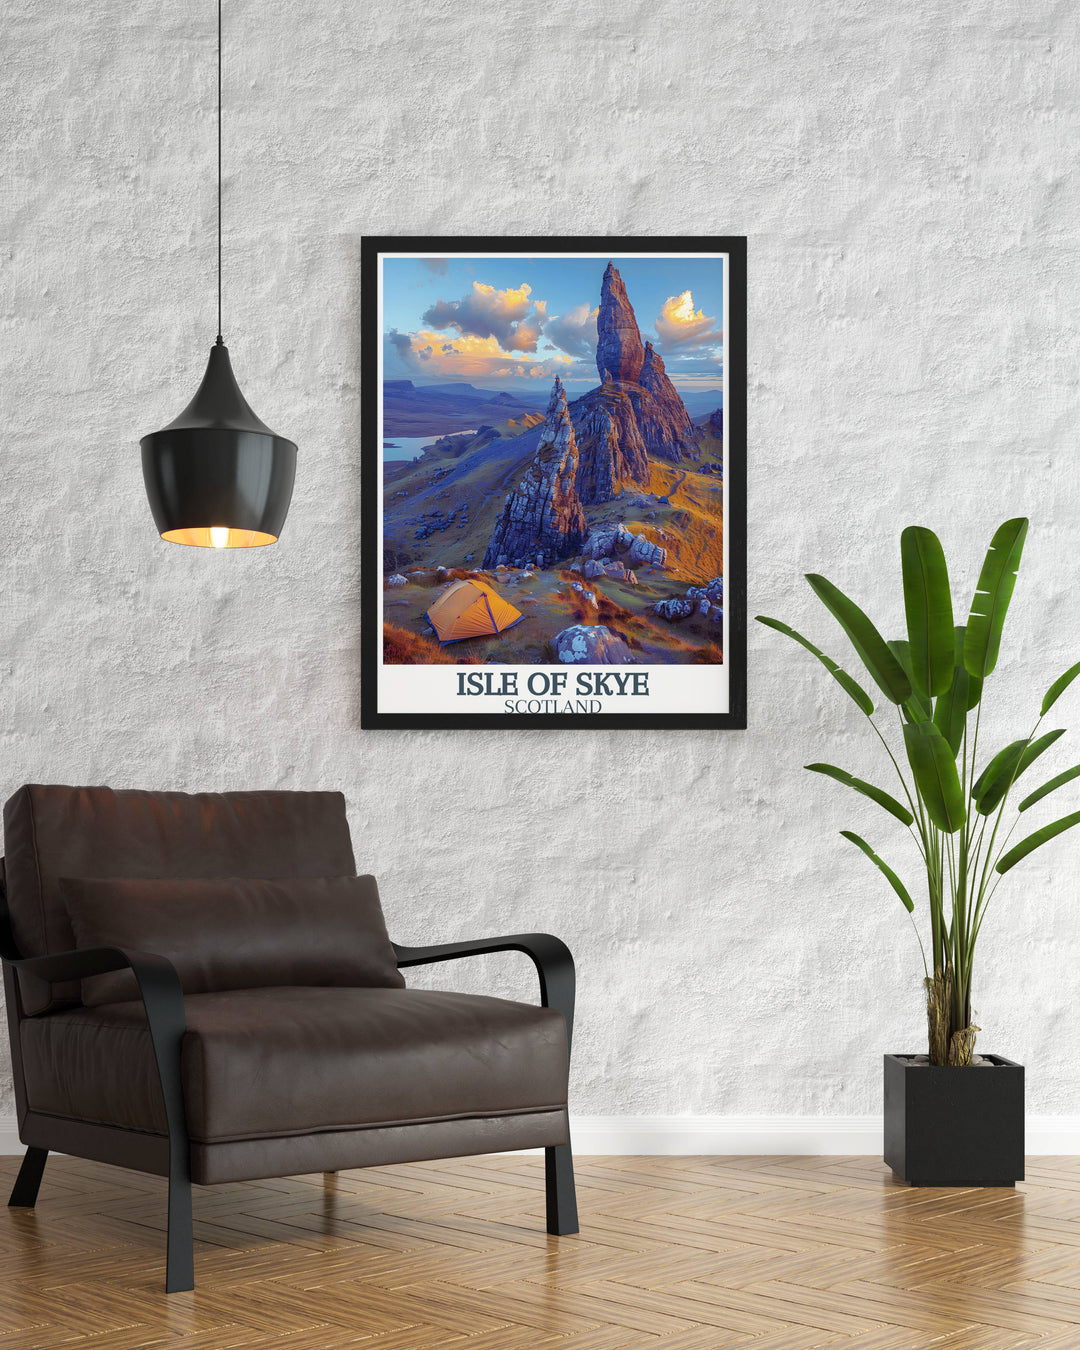 Travel poster of The Old Man of Storr offering a scenic Highland vista for travel enthusiasts